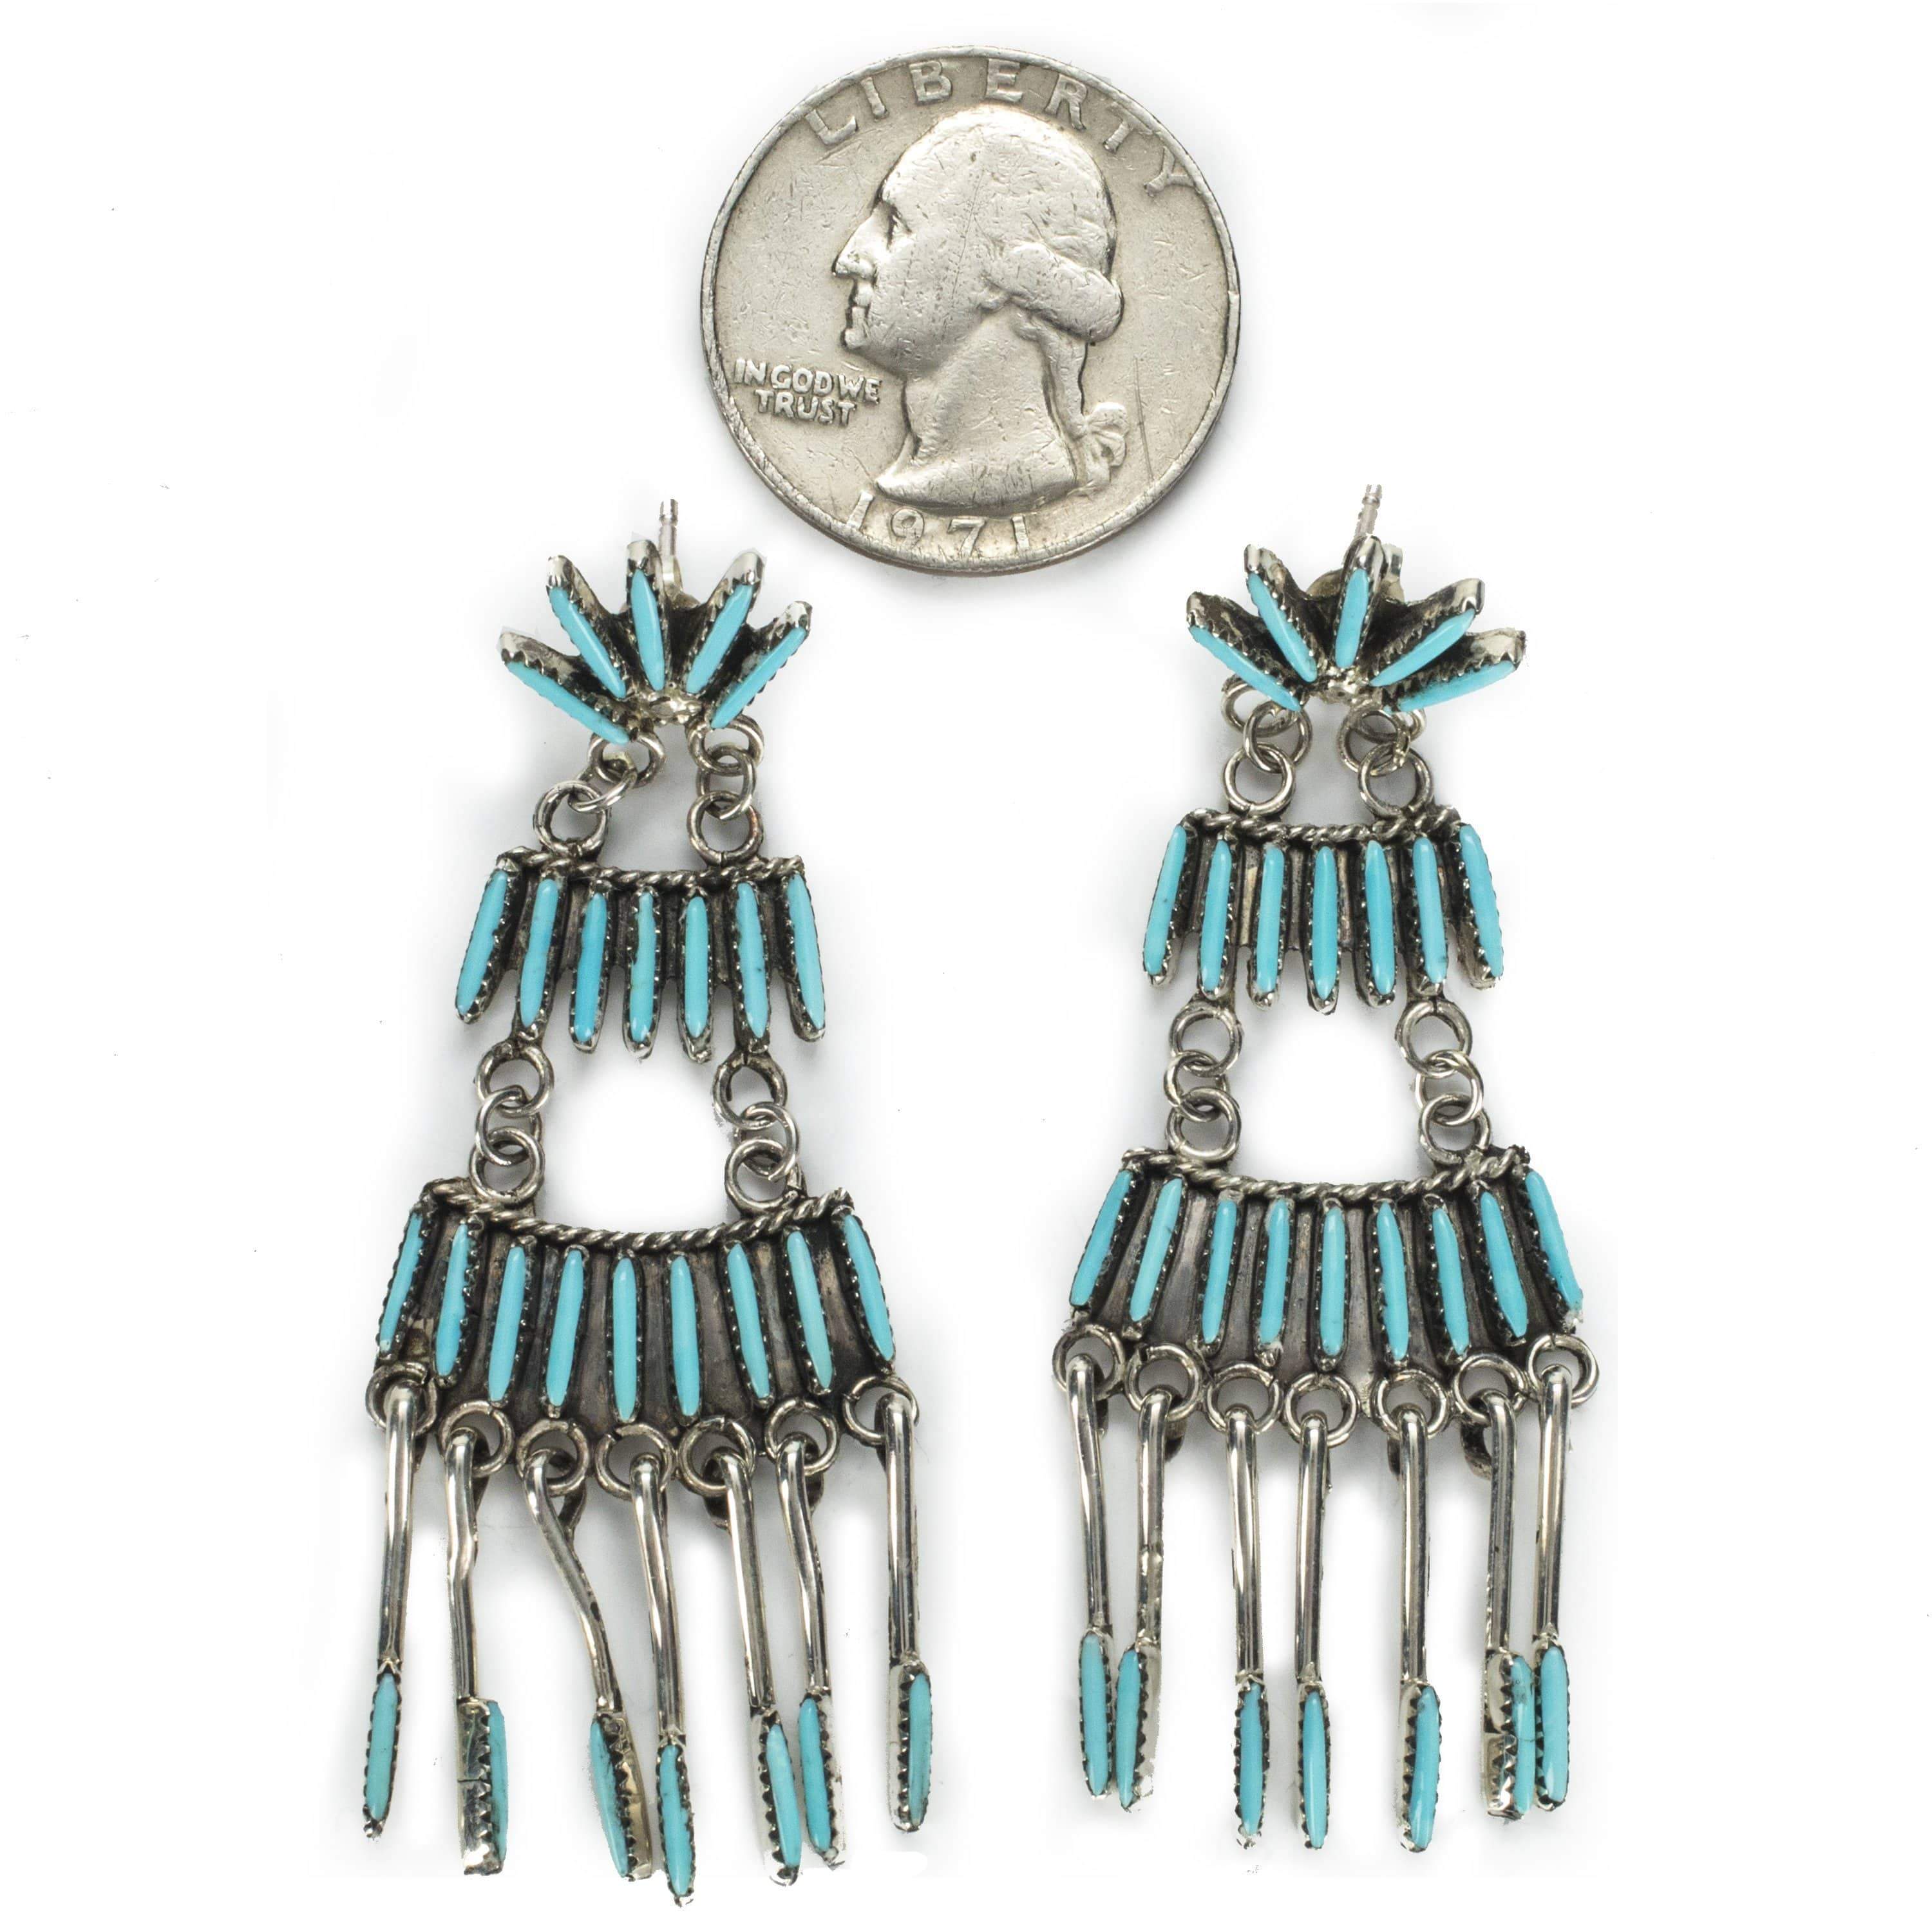 Kalifano Native American Jewelry Kingman Turquoise Zuni Needle Point USA Native American Made 925 Sterling Silver Earrings with Stud Backing NAE1200.005